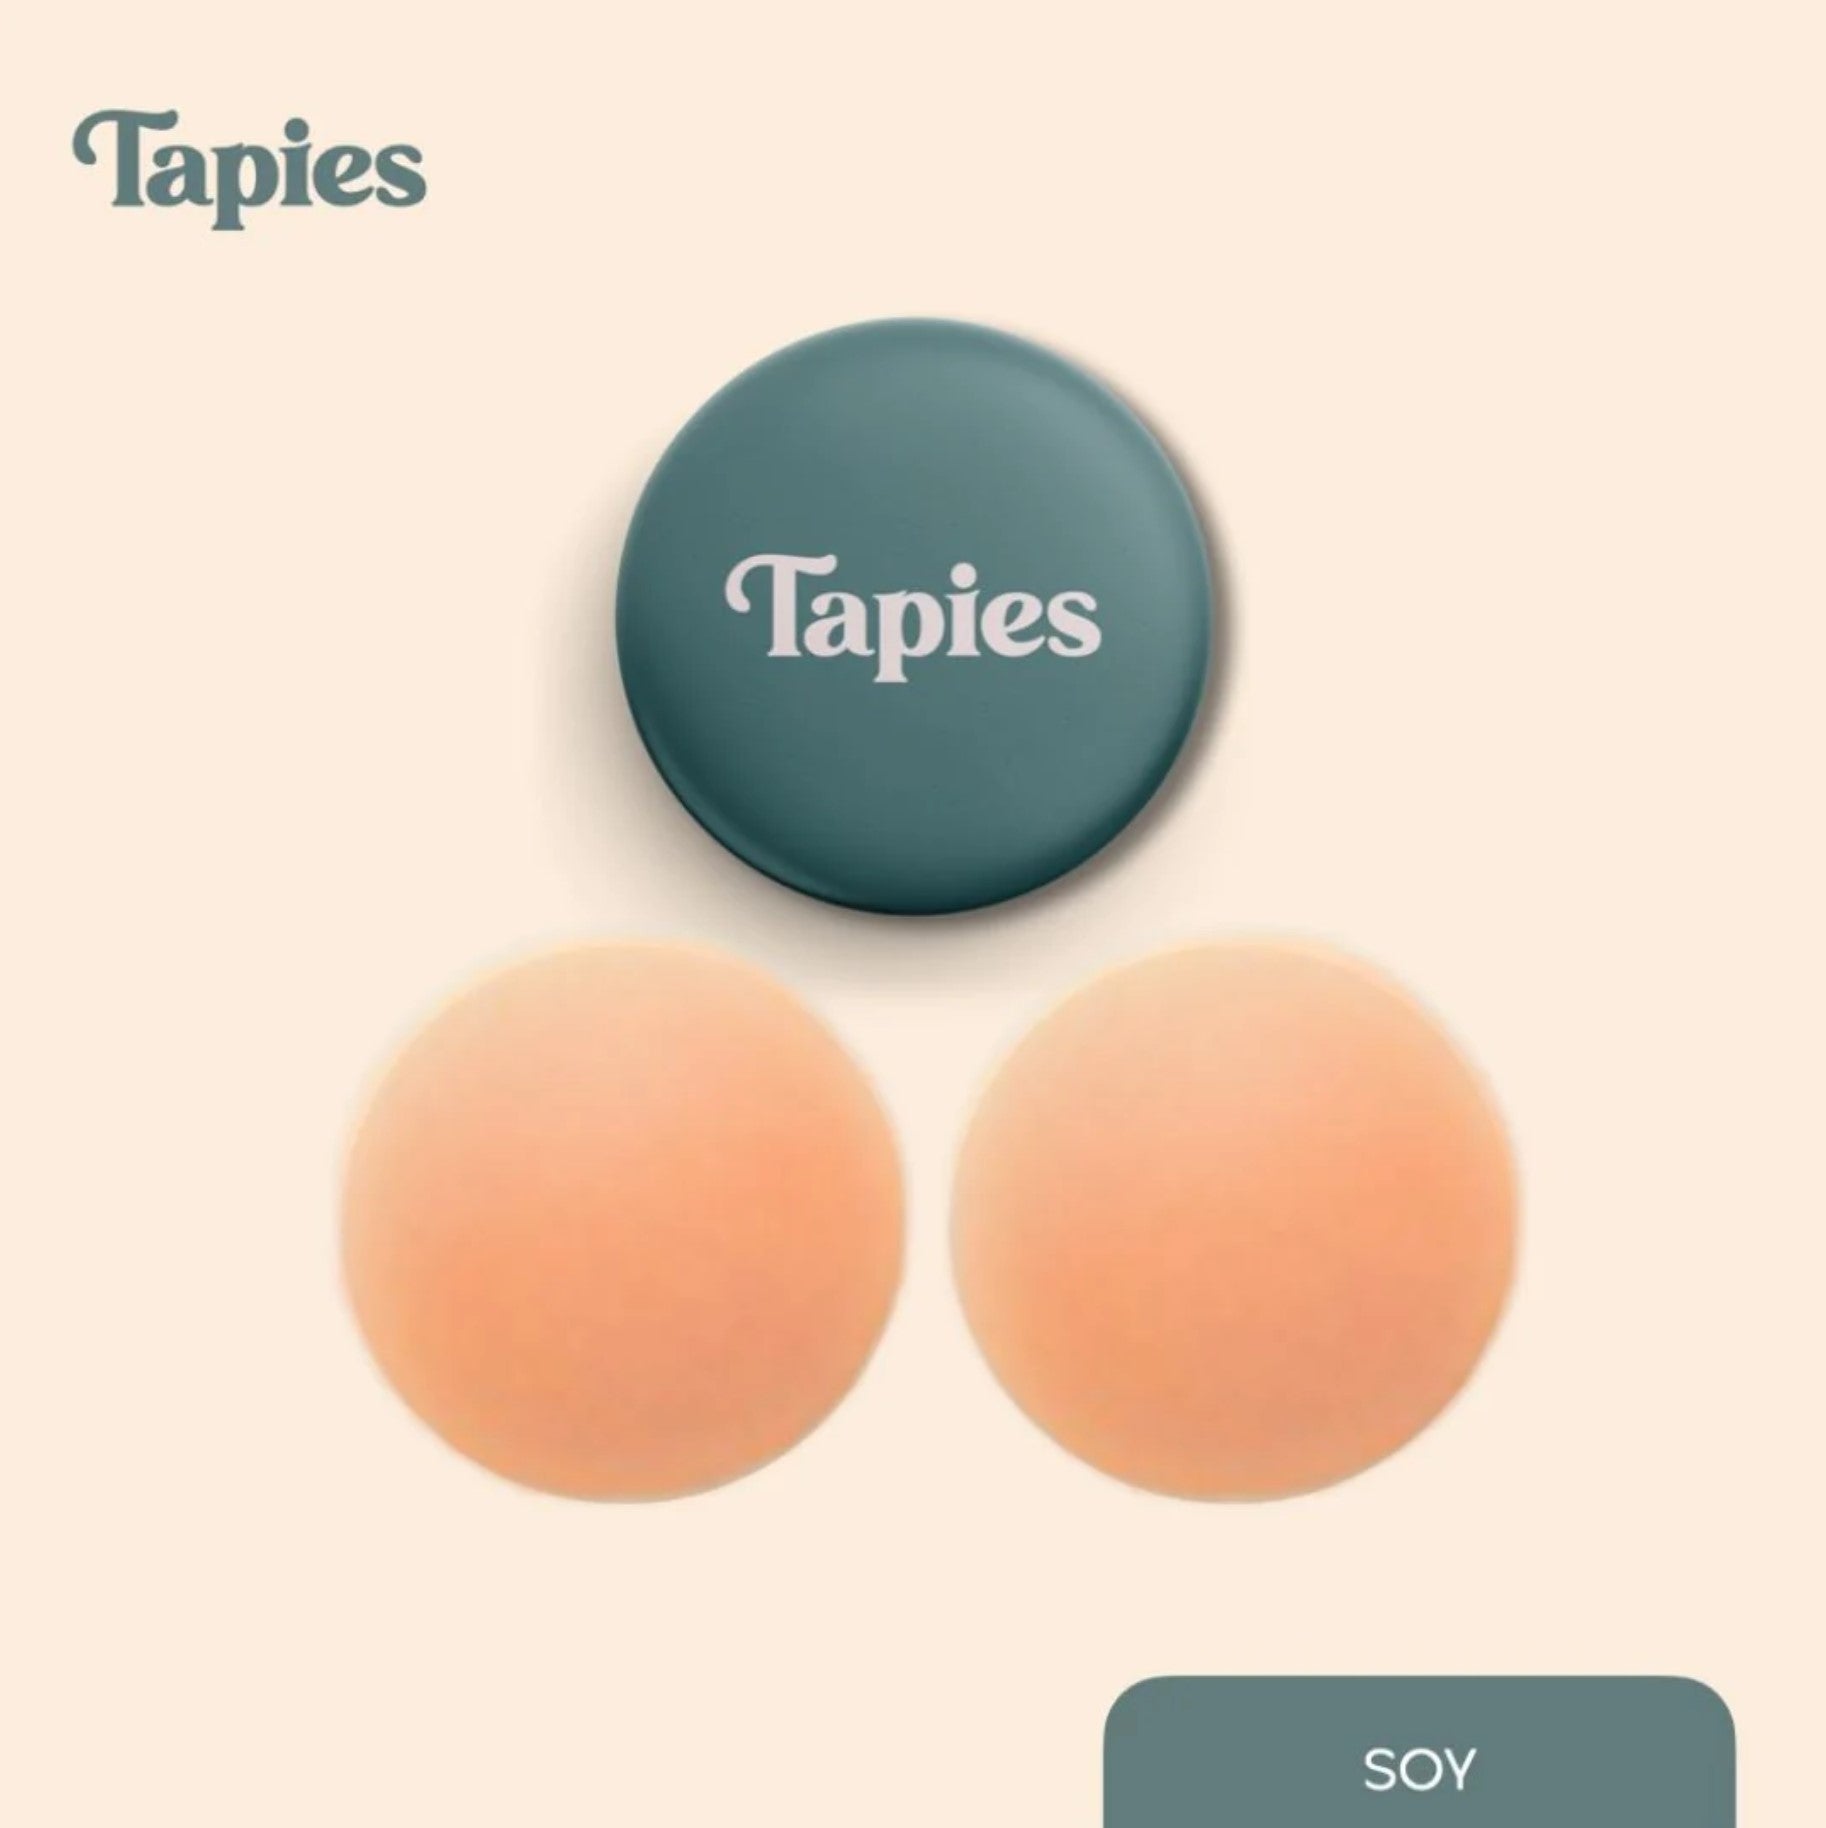 Tapies Nipple Cover Ups in Soy [Seamless, Opaque, Silicone Nipple